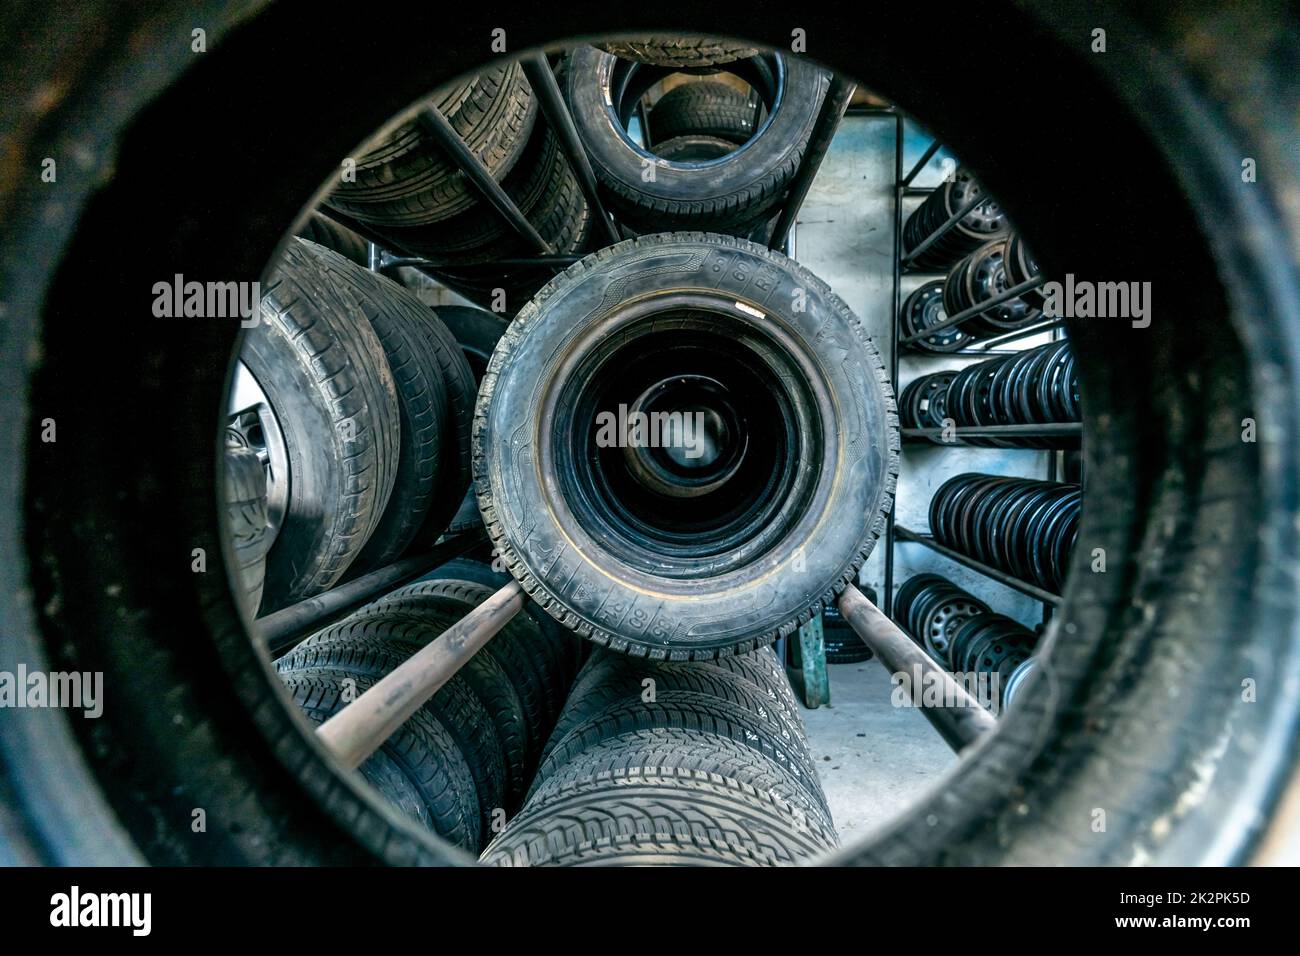 use car tires on the shelf in stock Stock Photo